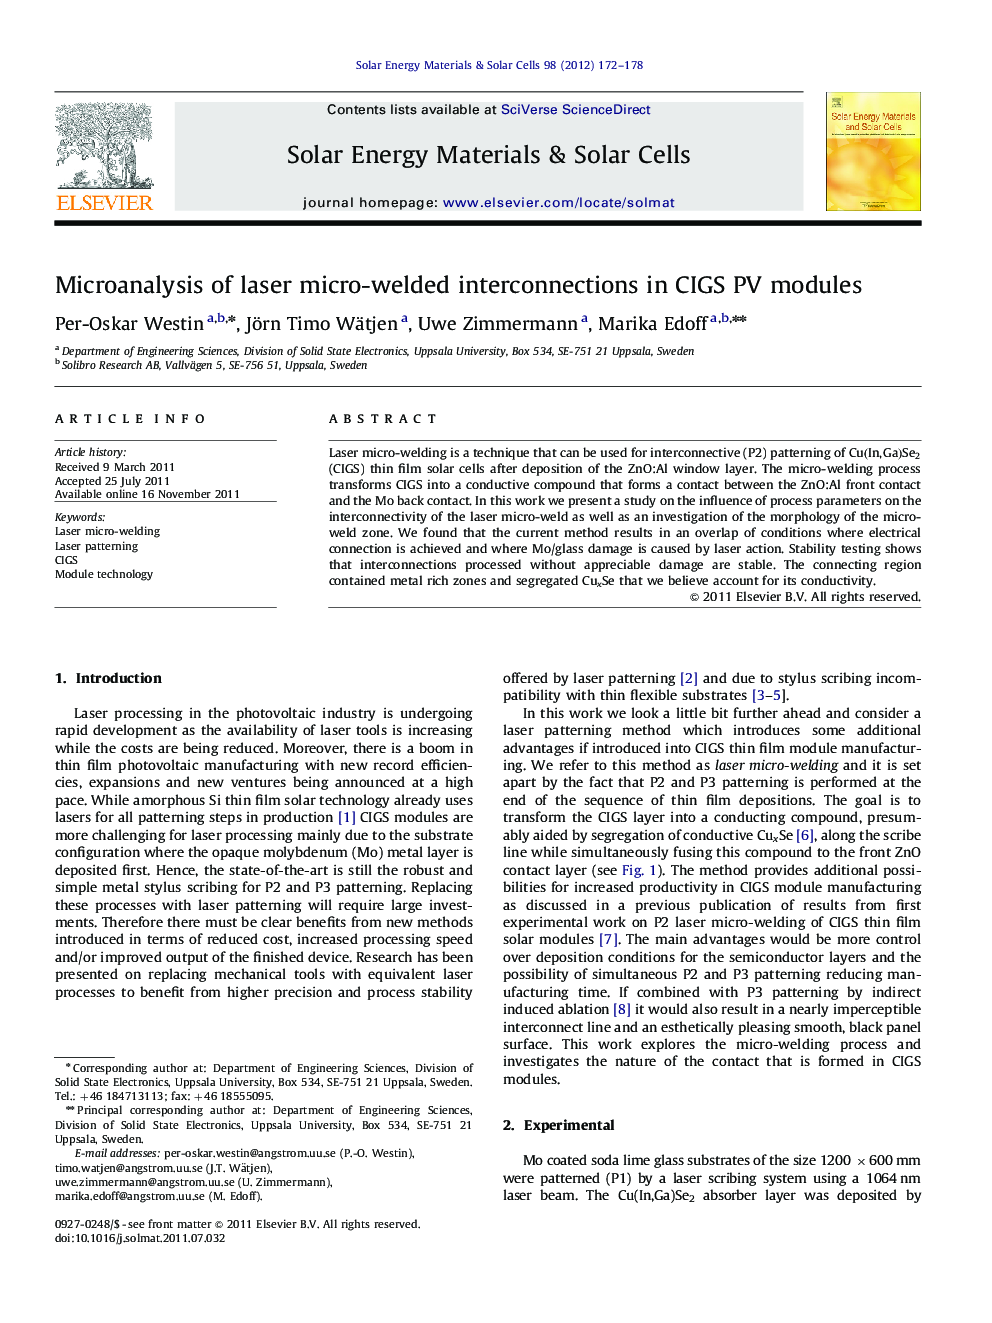 Microanalysis of laser micro-welded interconnections in CIGS PV modules